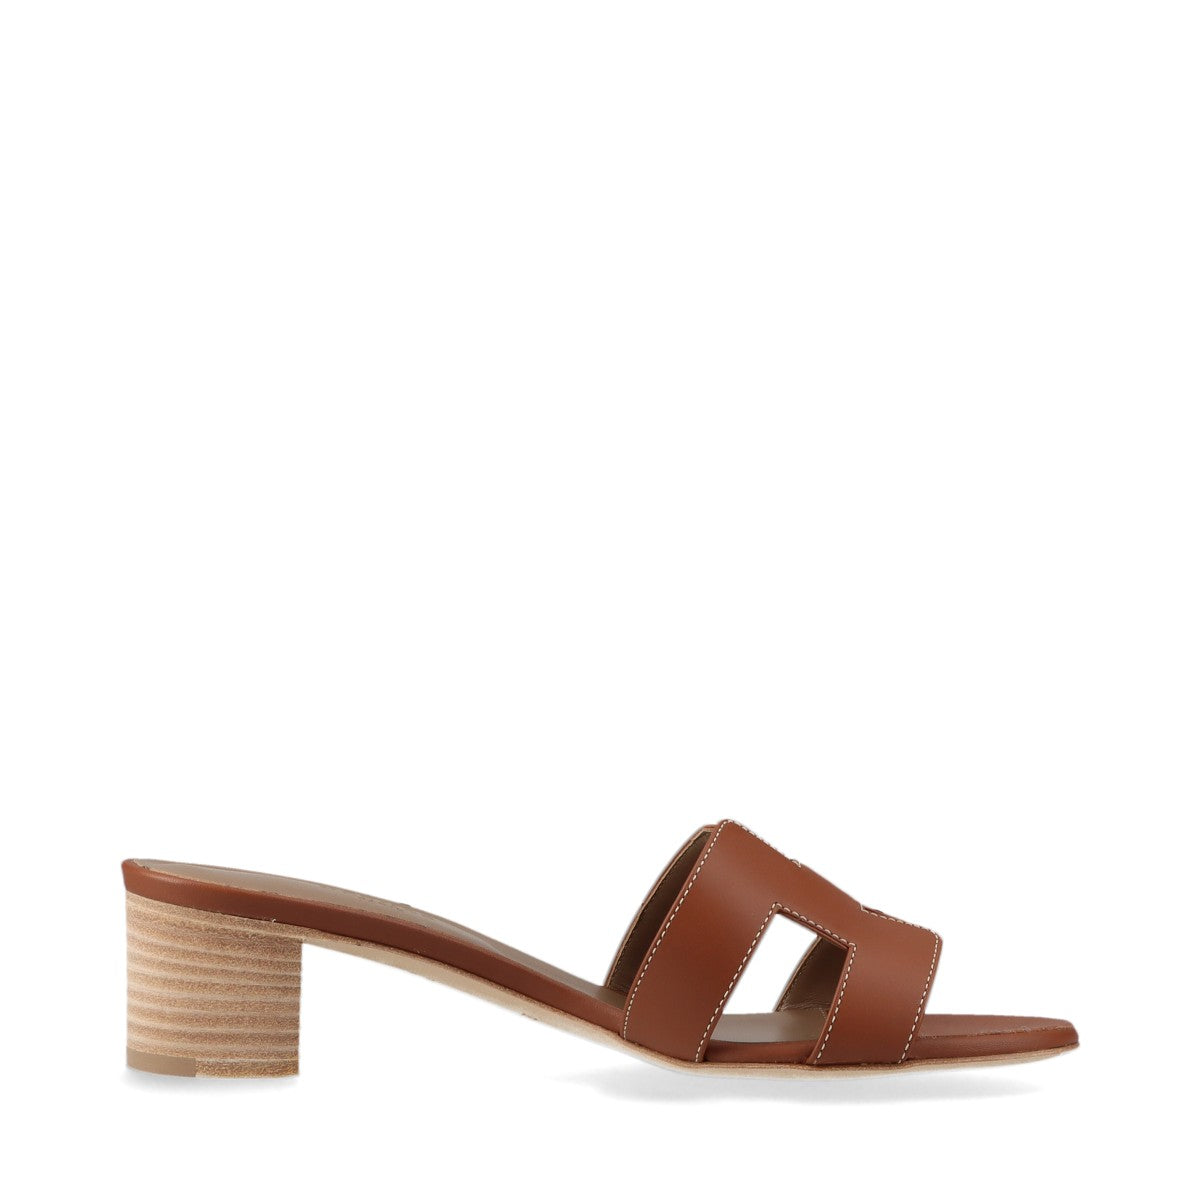 Hermès OASIS Leather Sandals EU37 Ladies' Brown Box There is a bag